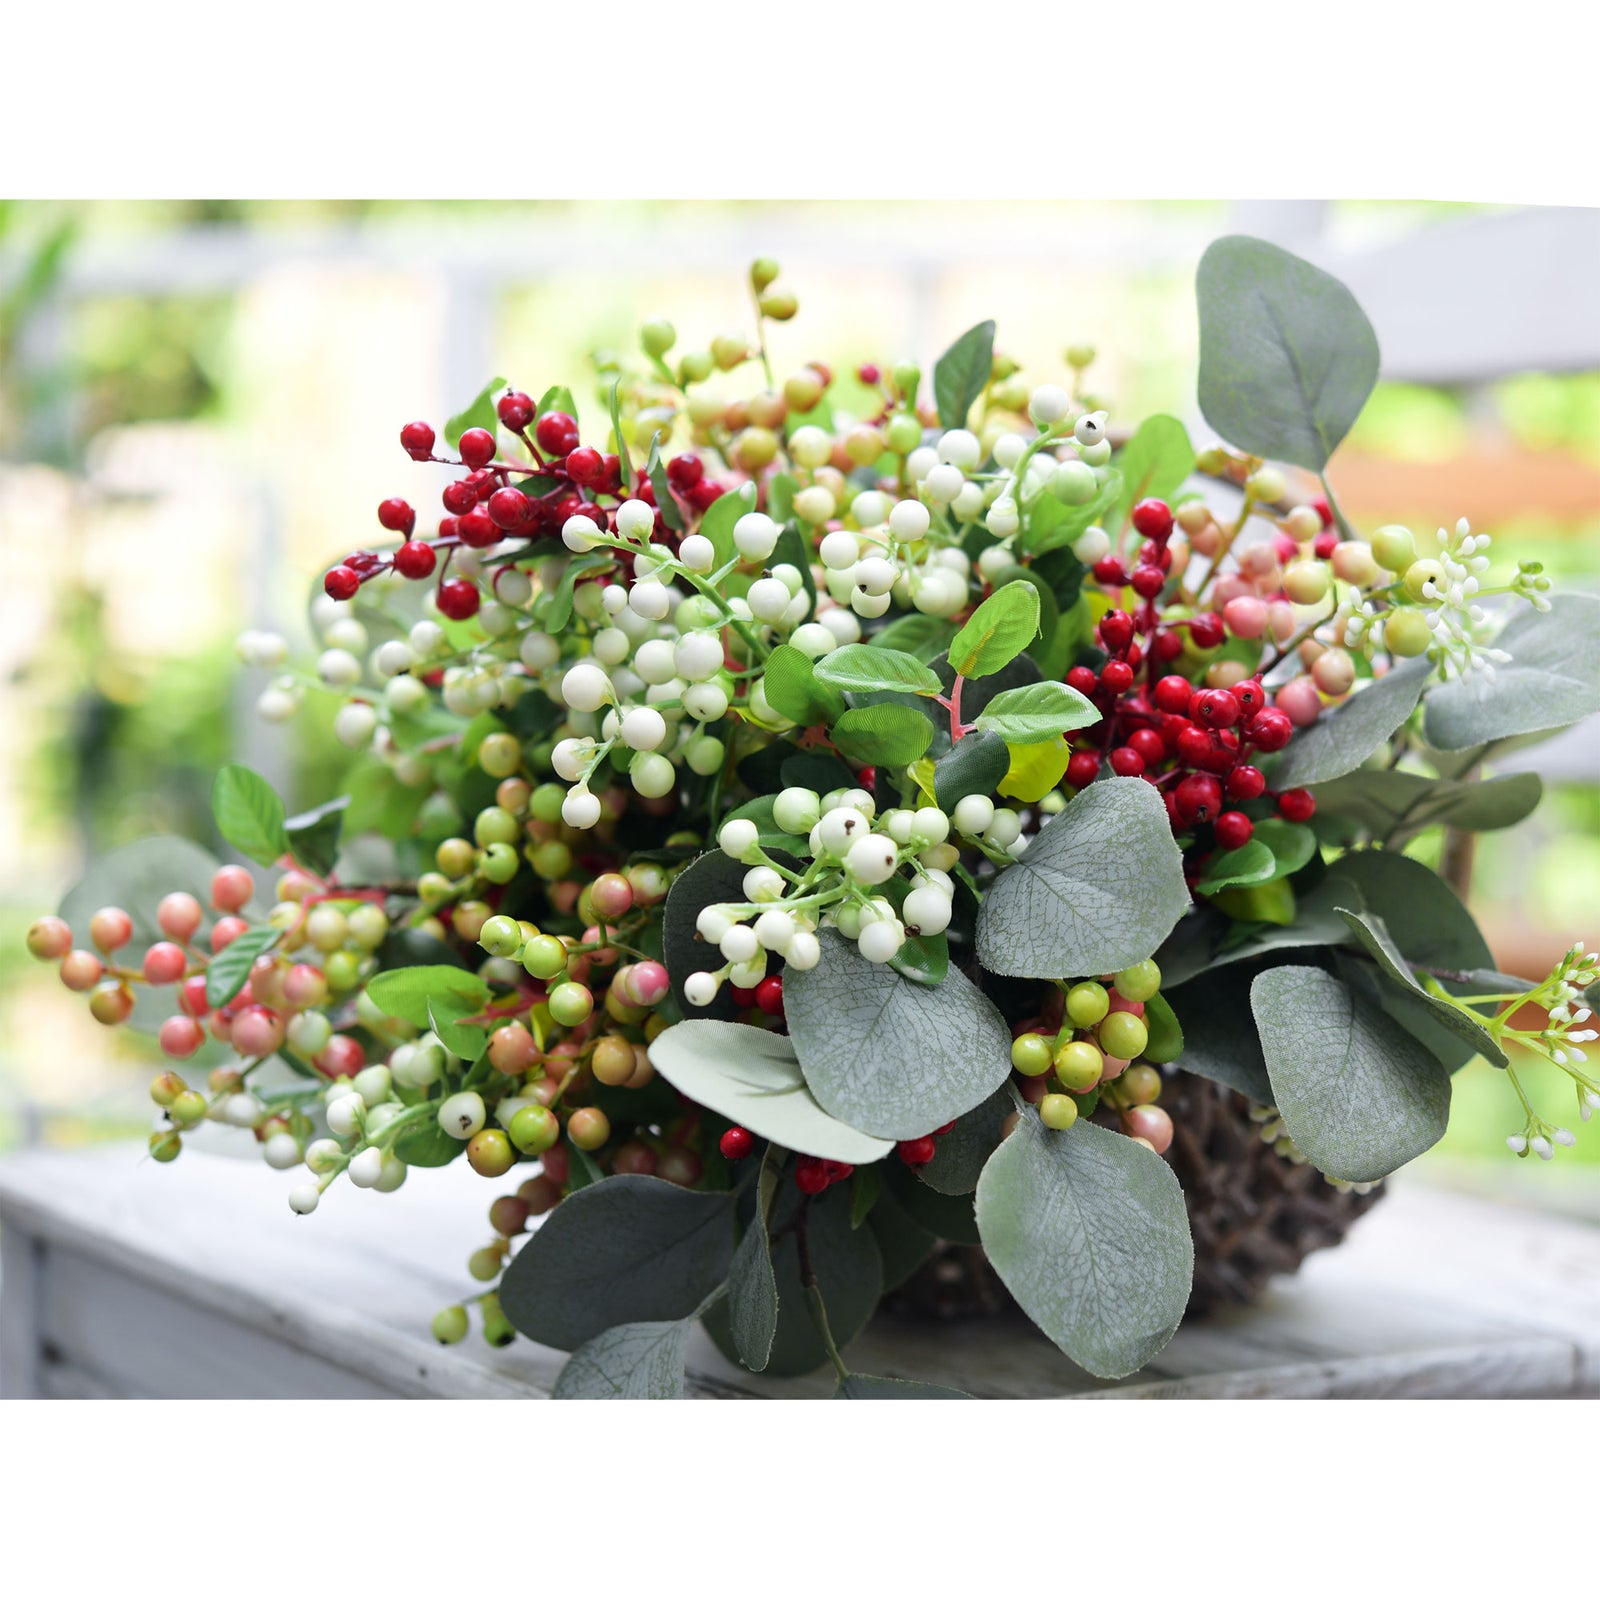 Festive Joyful Artificial Holly Red Berry Stems for the Holidays: Set of 10 for Stunning Décor